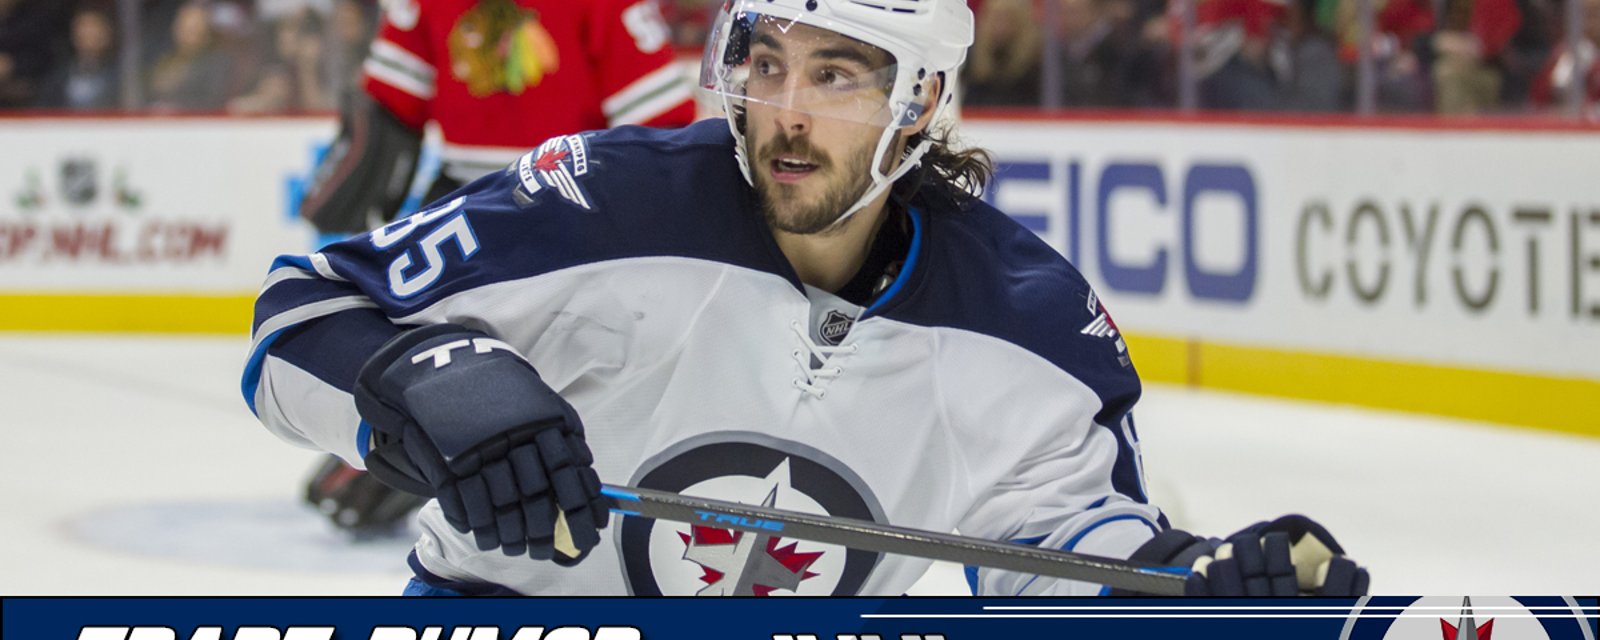 Rumor: Are the Winnipeg Jets shopping Matthieu Perreault for a defenseman?